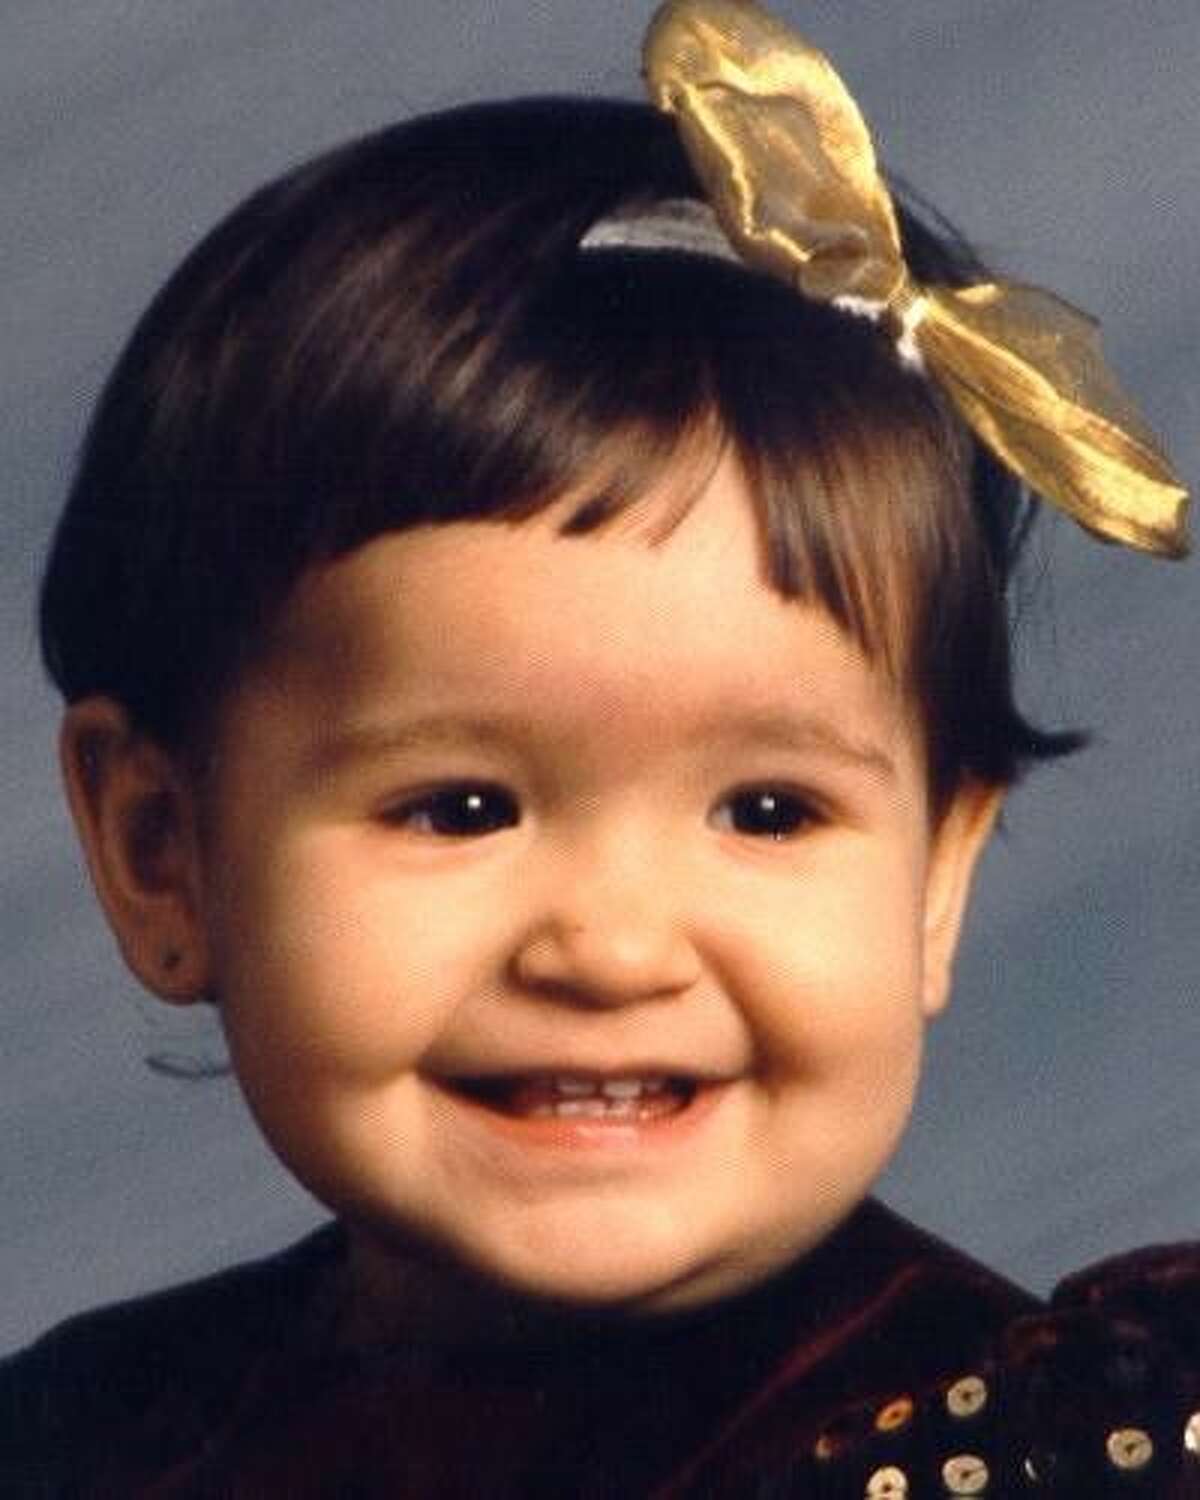 Bianca Lozano as a baby, more than 16 years ago.